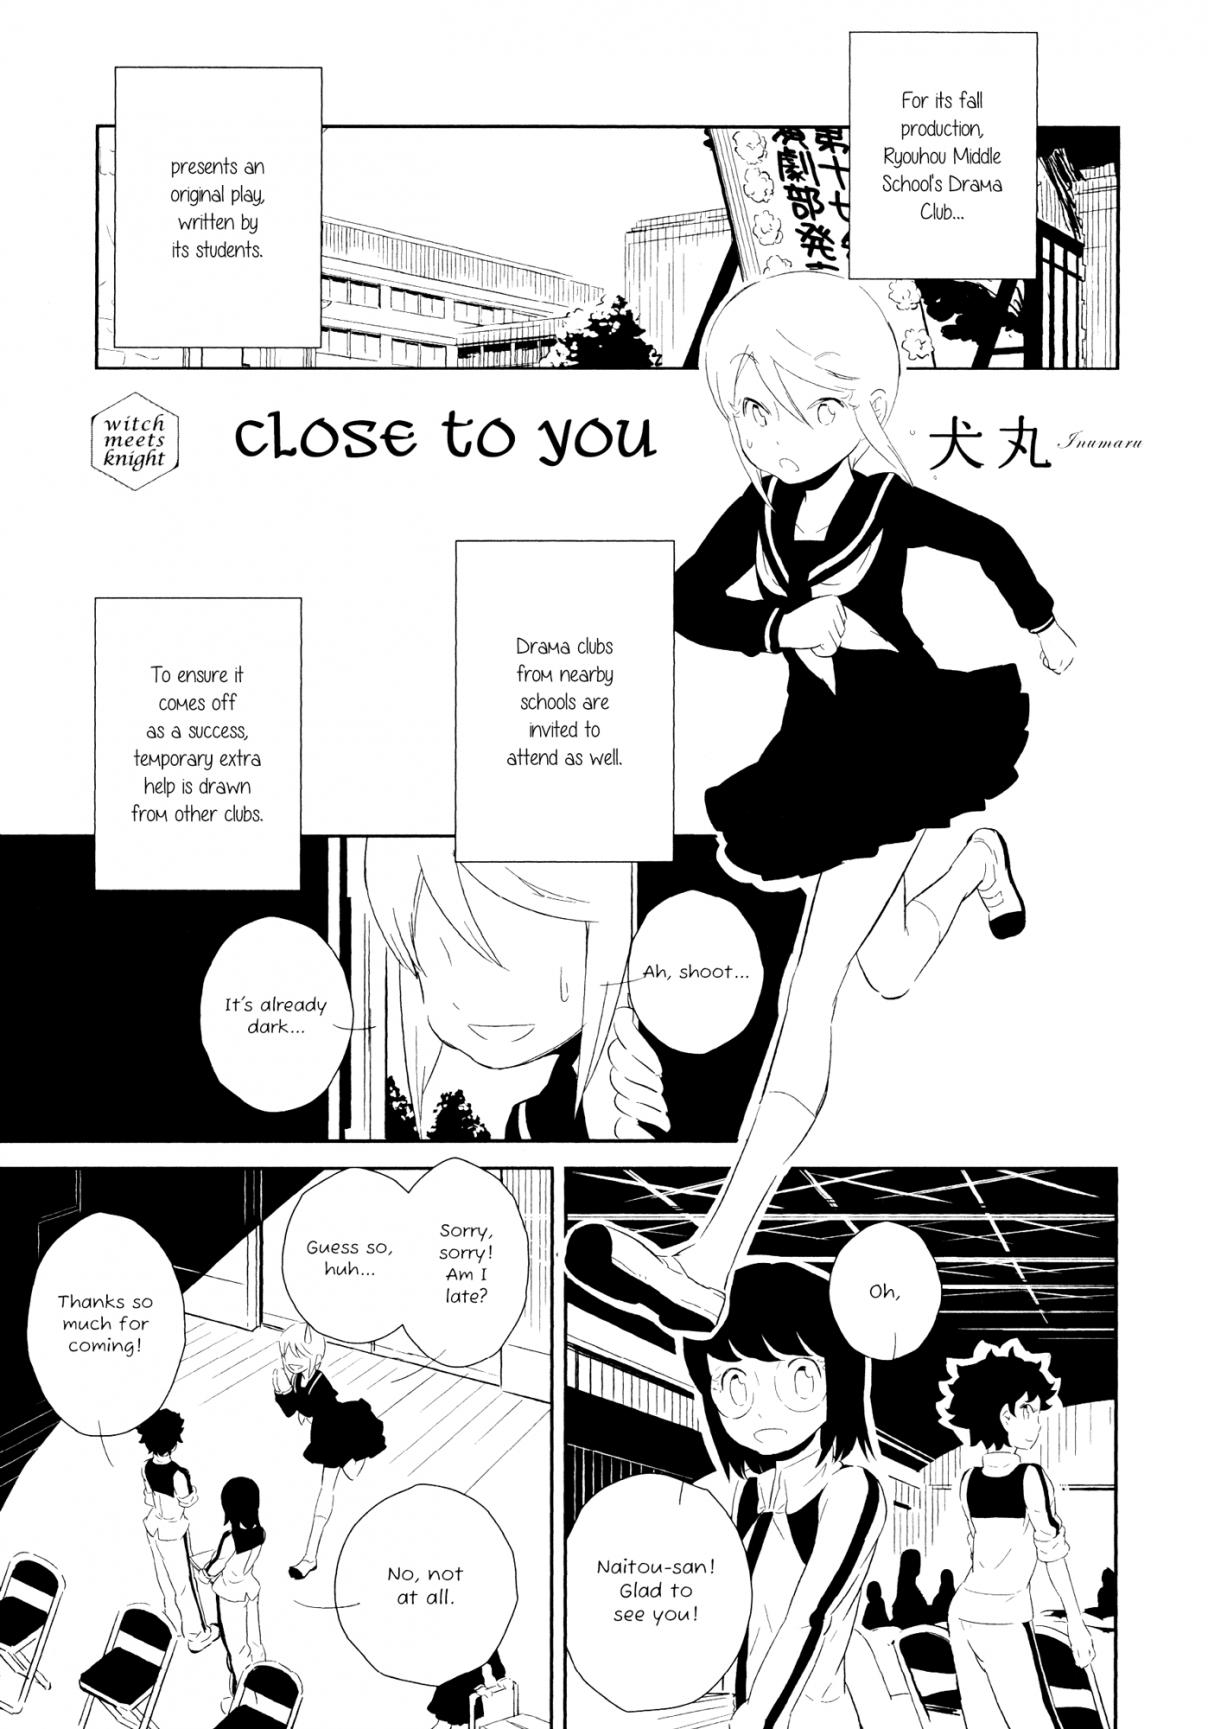 Witch Meets Knight Ch. 7 Close to You